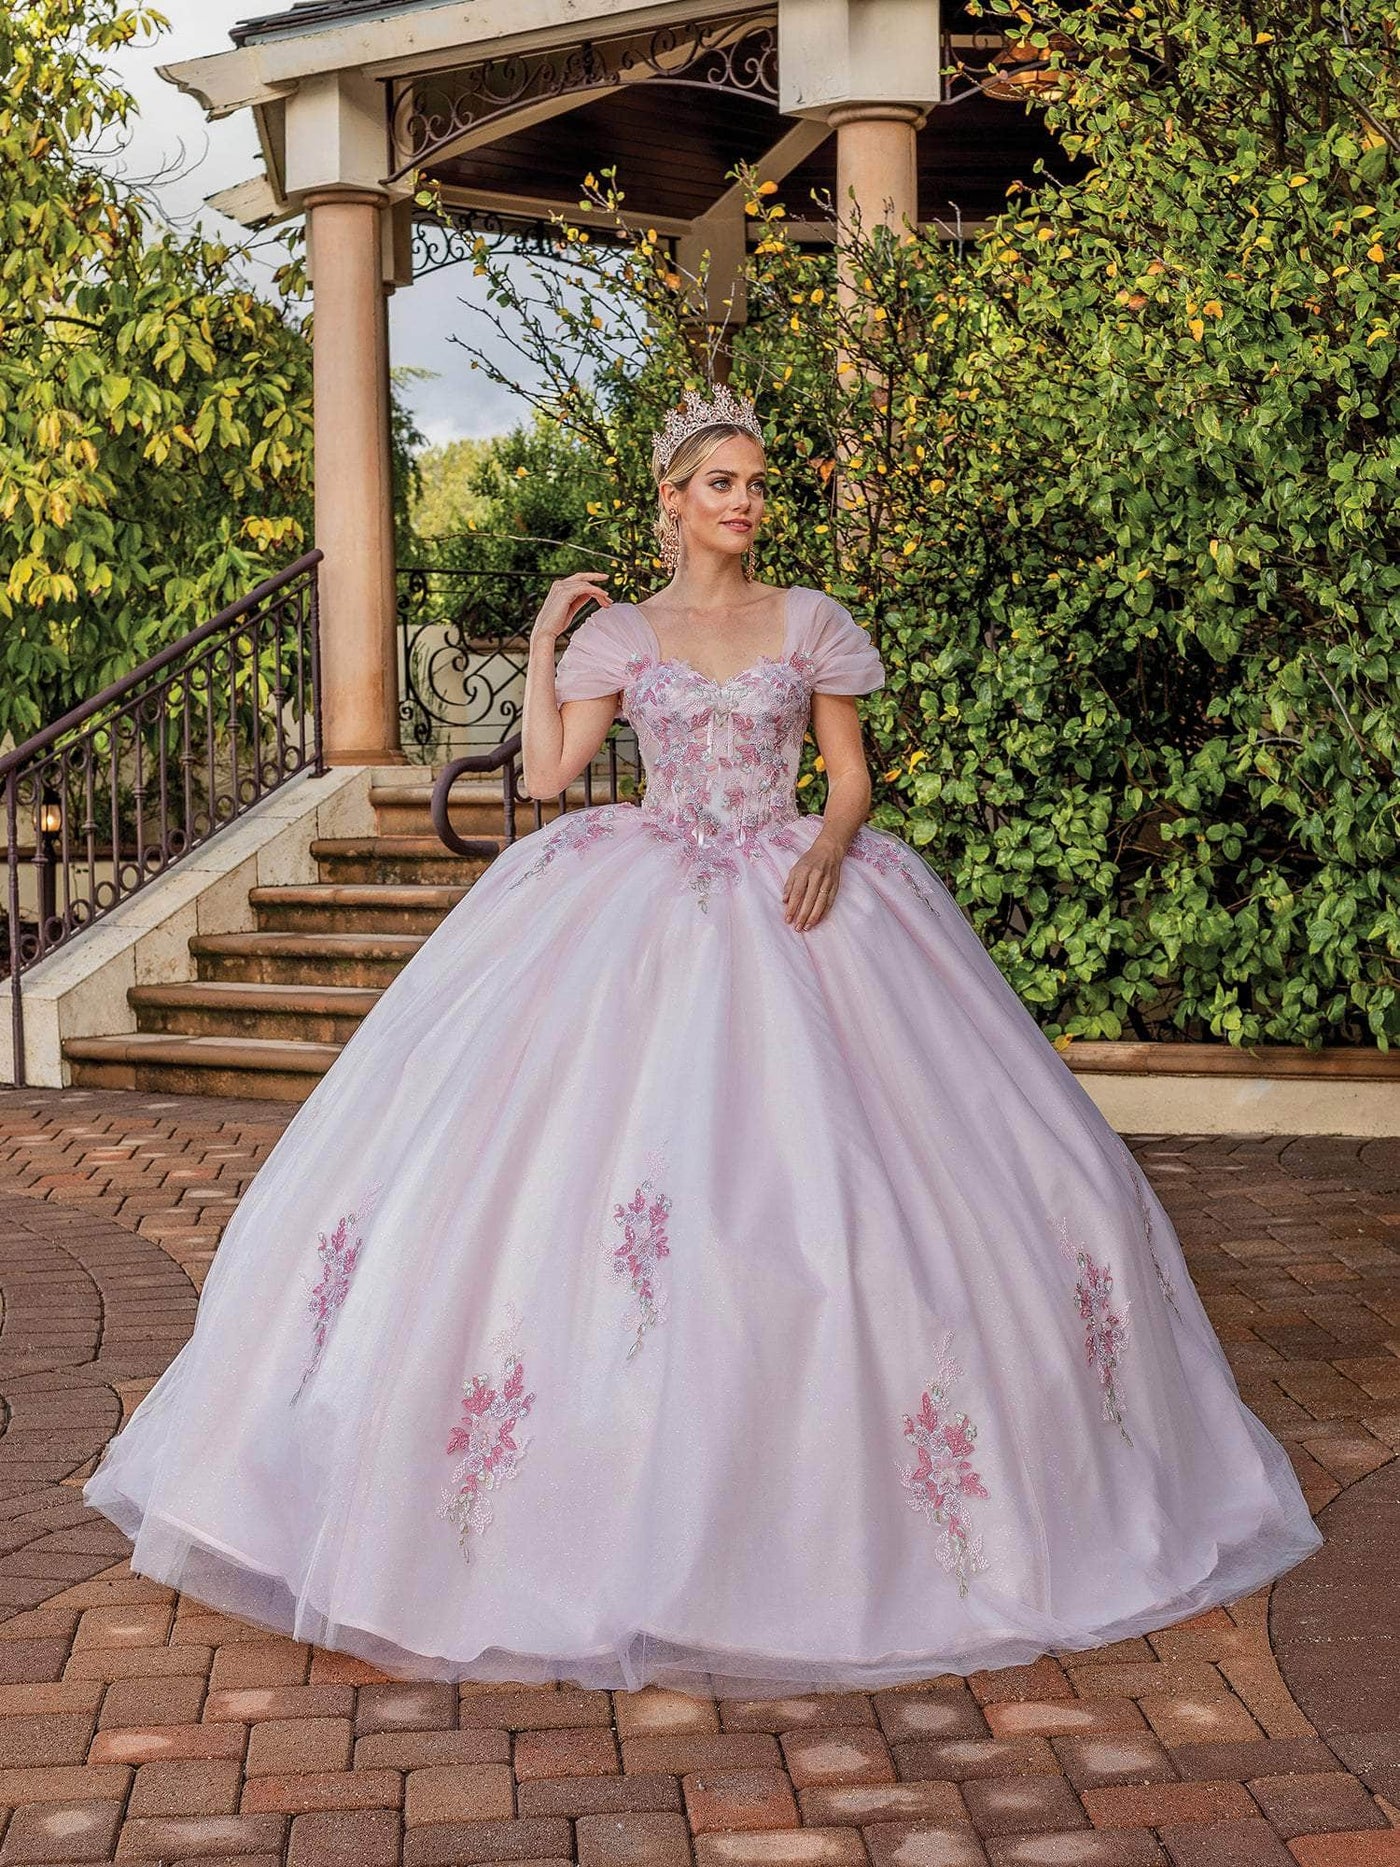 Dancing Queen 1892 - Ruffled Cap Sleeve Ballgown Special Occasion Dresses